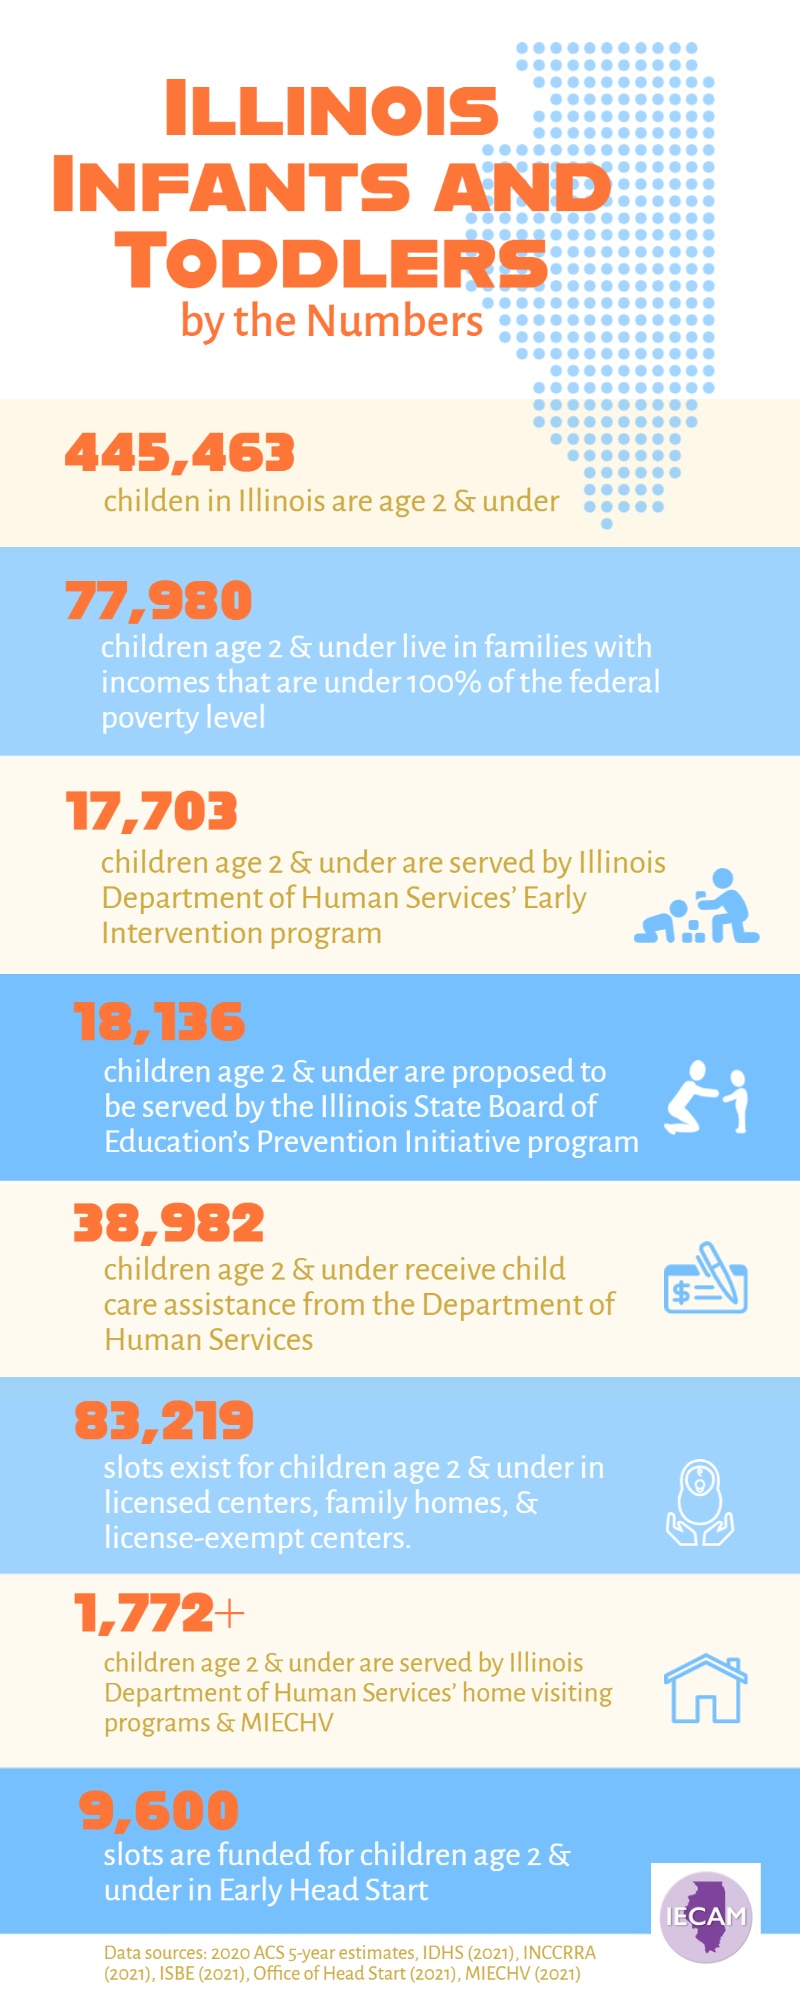 Infographic with key data points: 445,463 children in Illinois are age 2 and under; 77,980 children age 2 and under live in families with incomes that are 100% of less of the federal poverty level; 17,703 children age 2 & under are served by early intervention programs, 1,772+ children age 2 & under are served by IDHS home visiting programs; 38,982 children age 2 & under receive CCAP assistance' 83,219 child care slots available for children age 2 & under, 9,600 slots are funded for children age 2 & under in Early Head Start